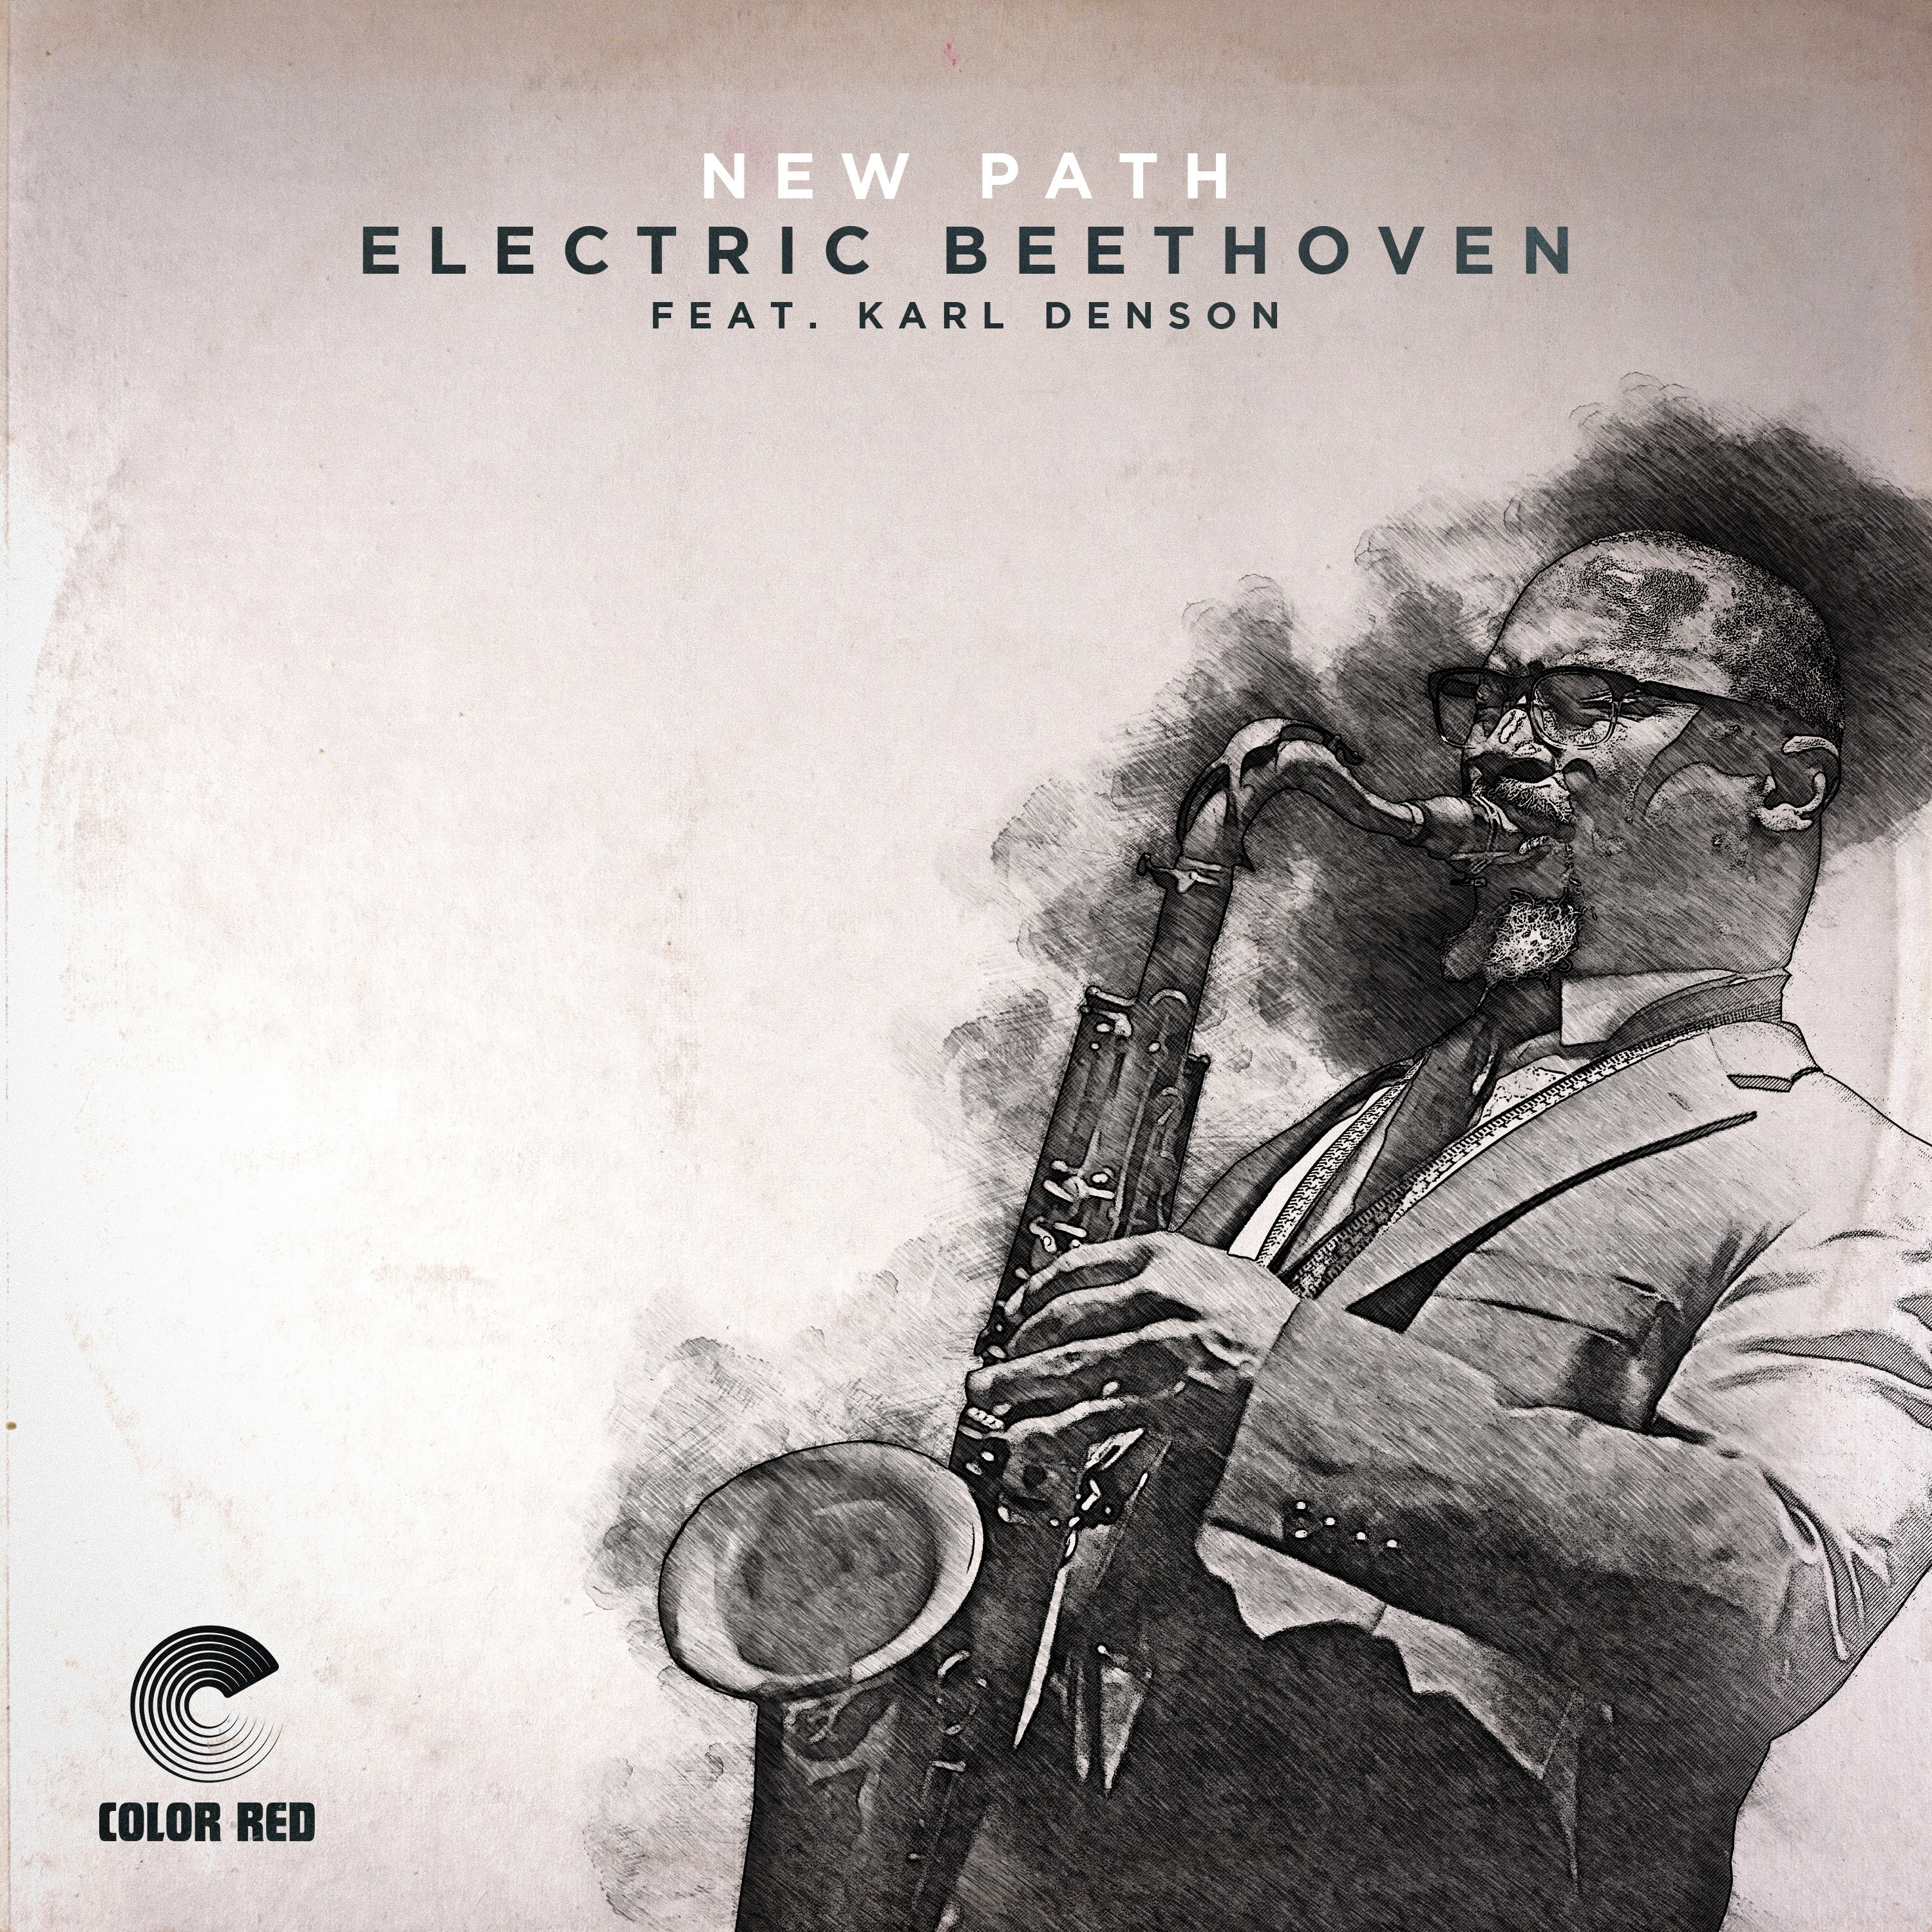 AVAILABLE NOW: "New Path" by Electric Beethoven ft. Karl Denson